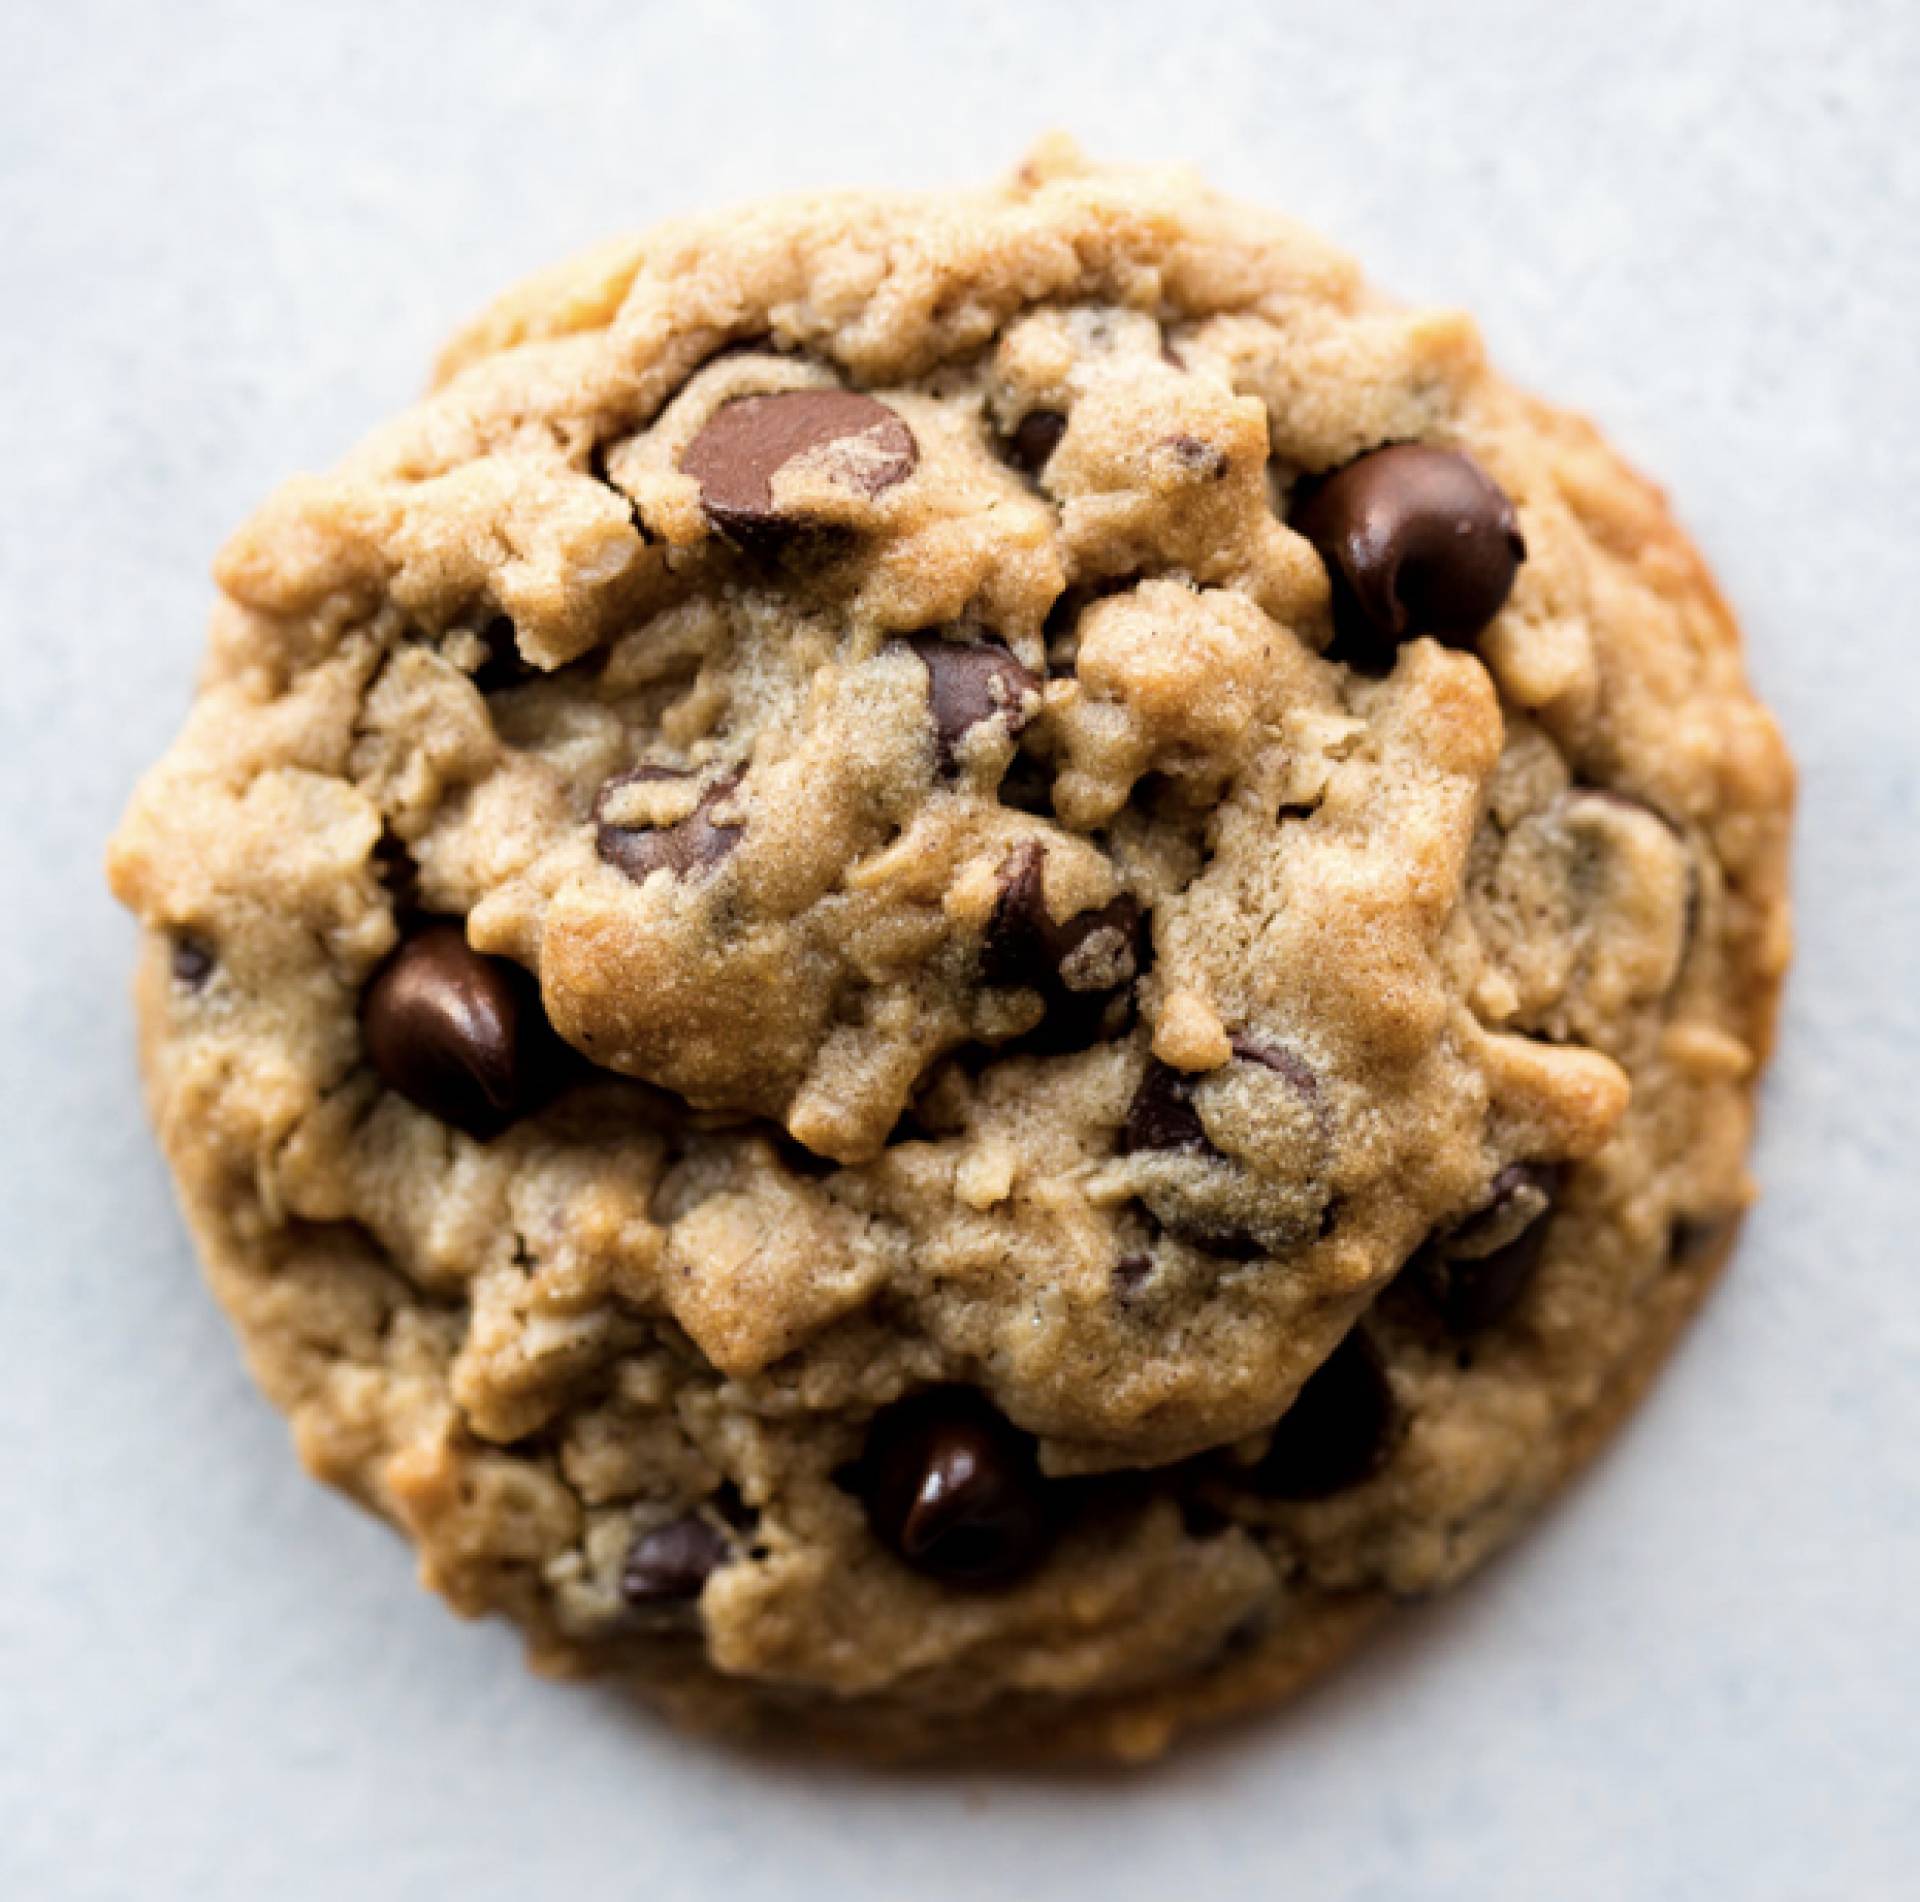 Peanut butter chocolate chips cookies